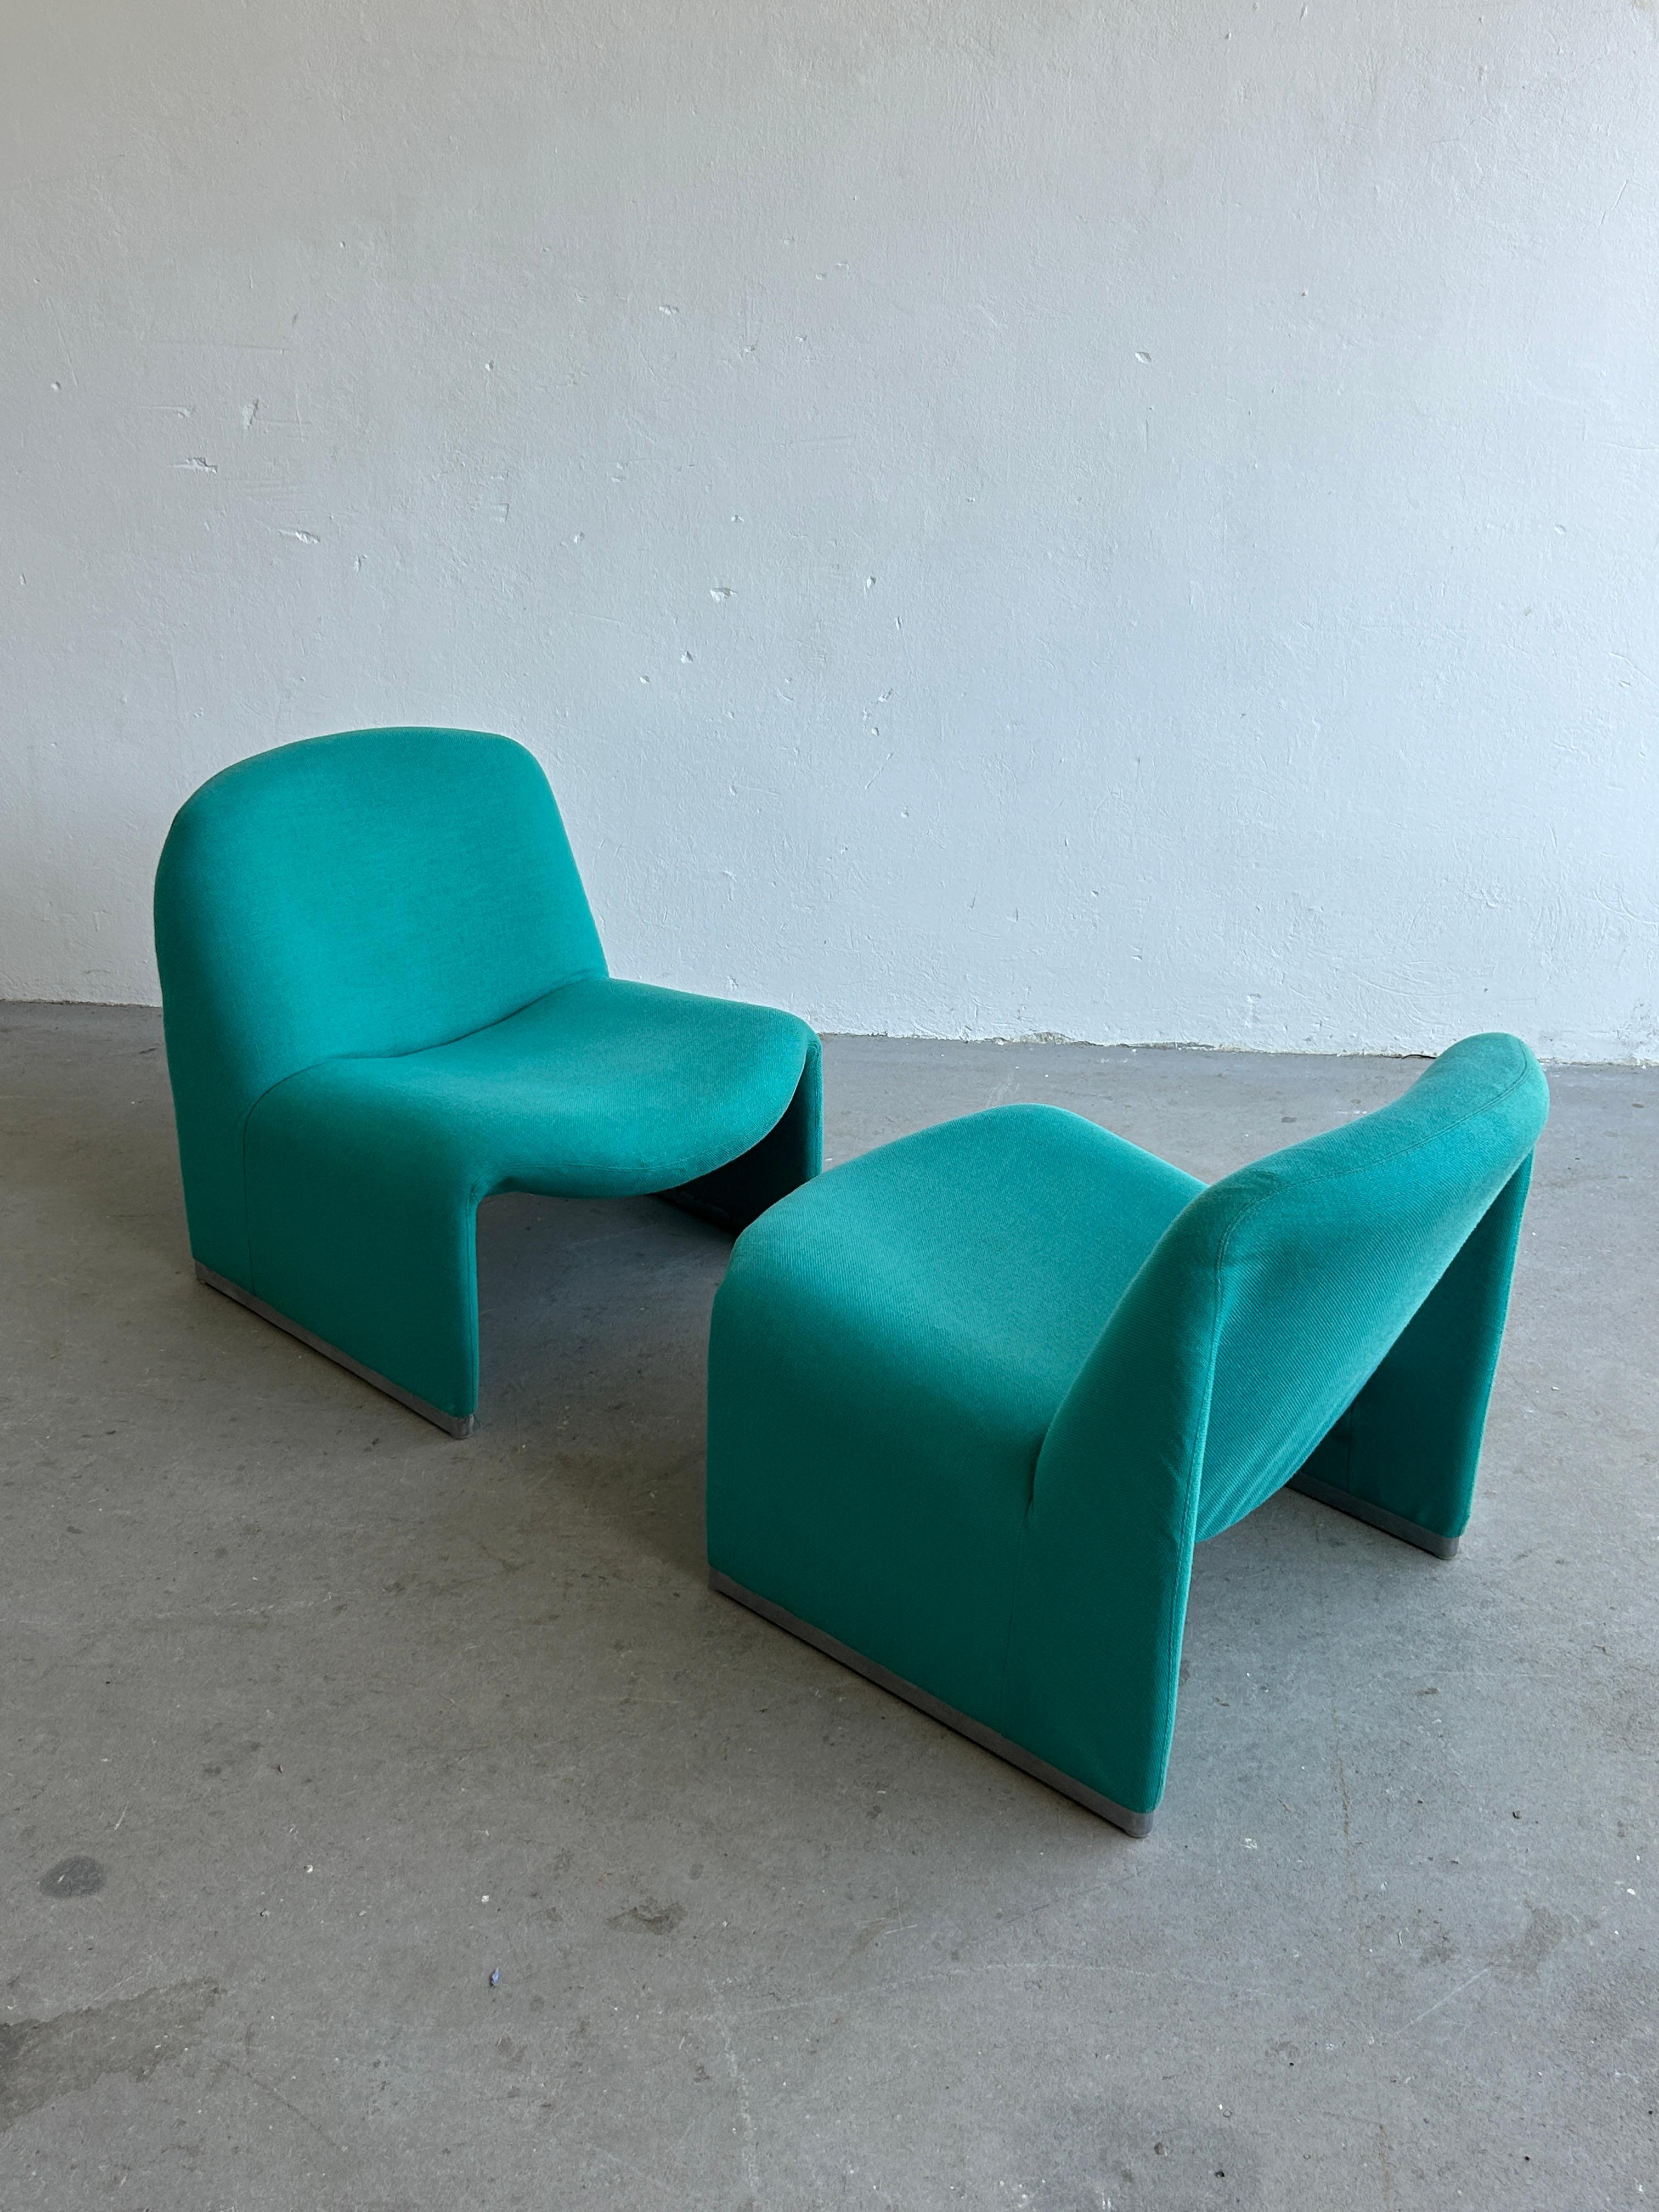 Italian Pair of Alky Chairs by Giancarlo Piretti for Anonima Castelli, 1970s Italy